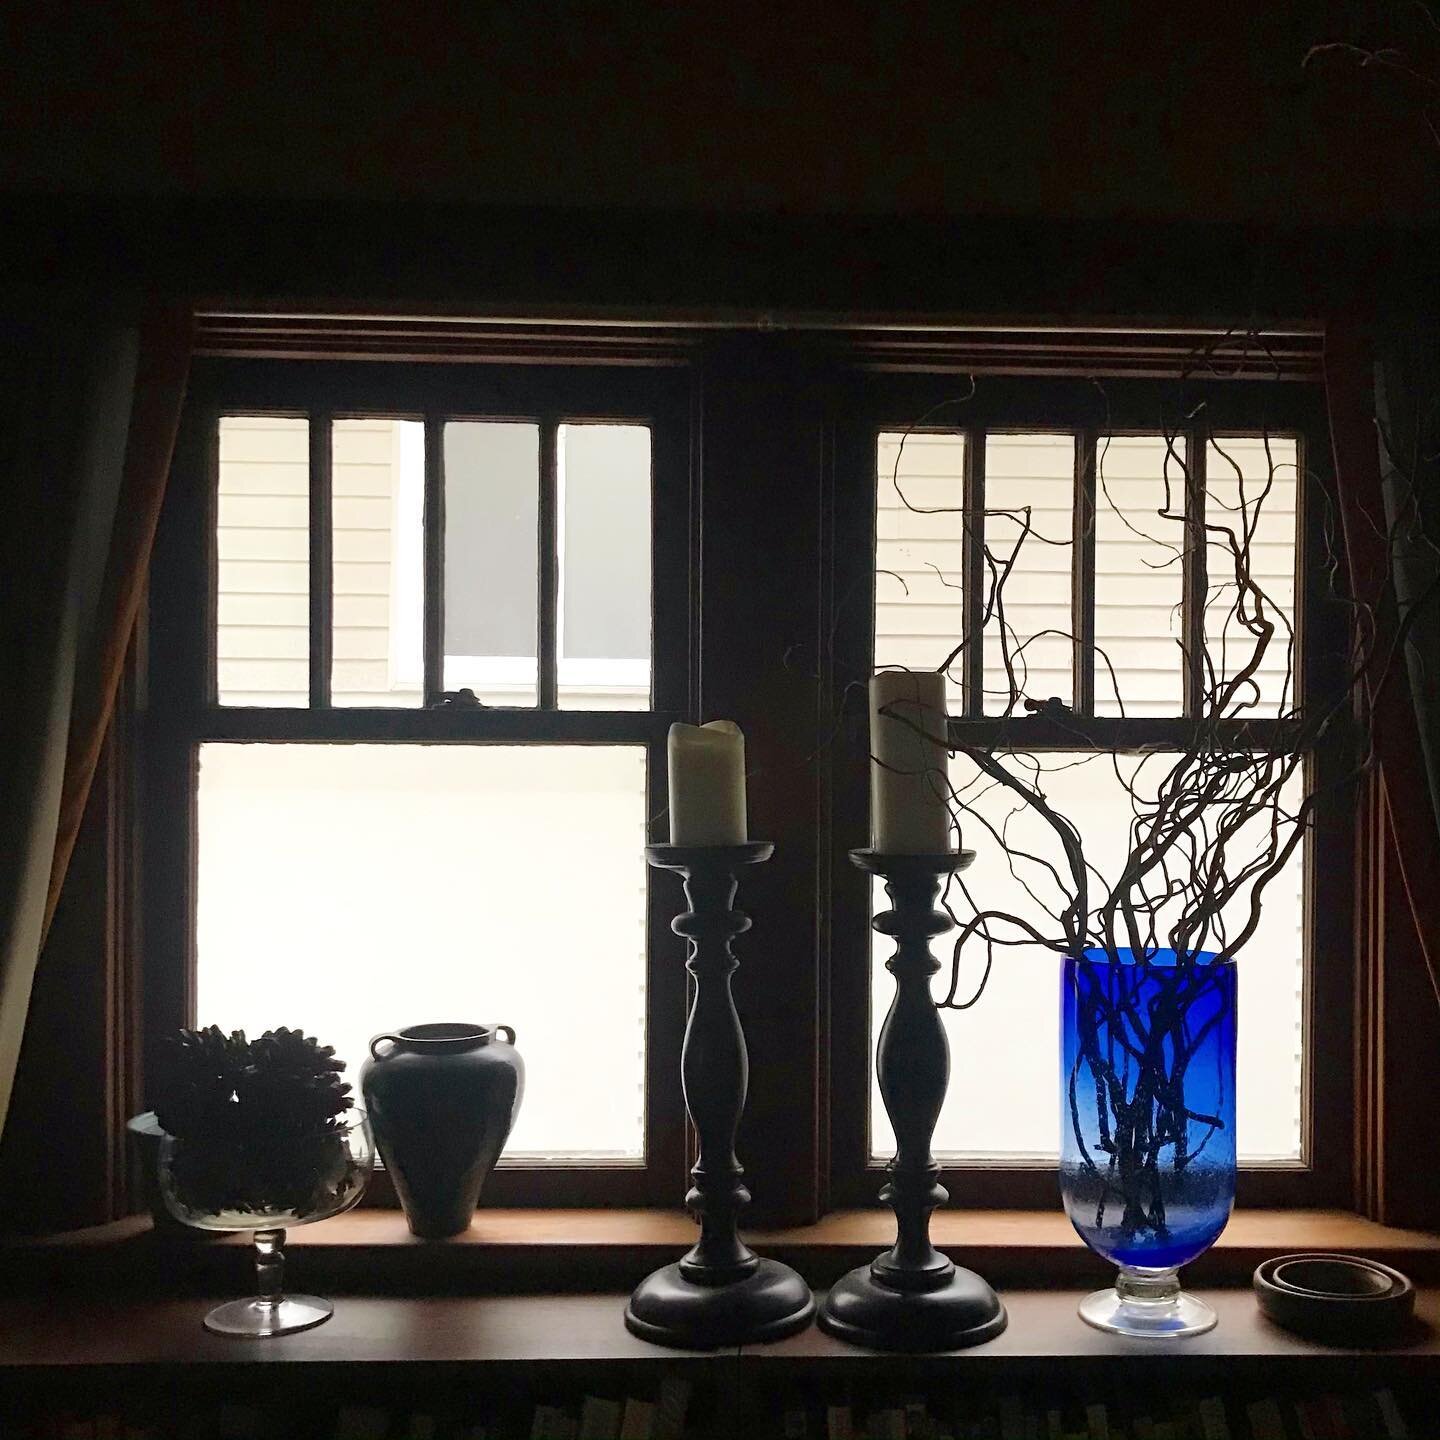 Dining room still life...3:30pm... dark in here! But the light that does remain is beautiful. The vase caught my eye, made me stop and get out my phone... 💙 #windowsill #stilllife #shadeandshadow #naturallight #cobaltblue #decor #styling #diningroom